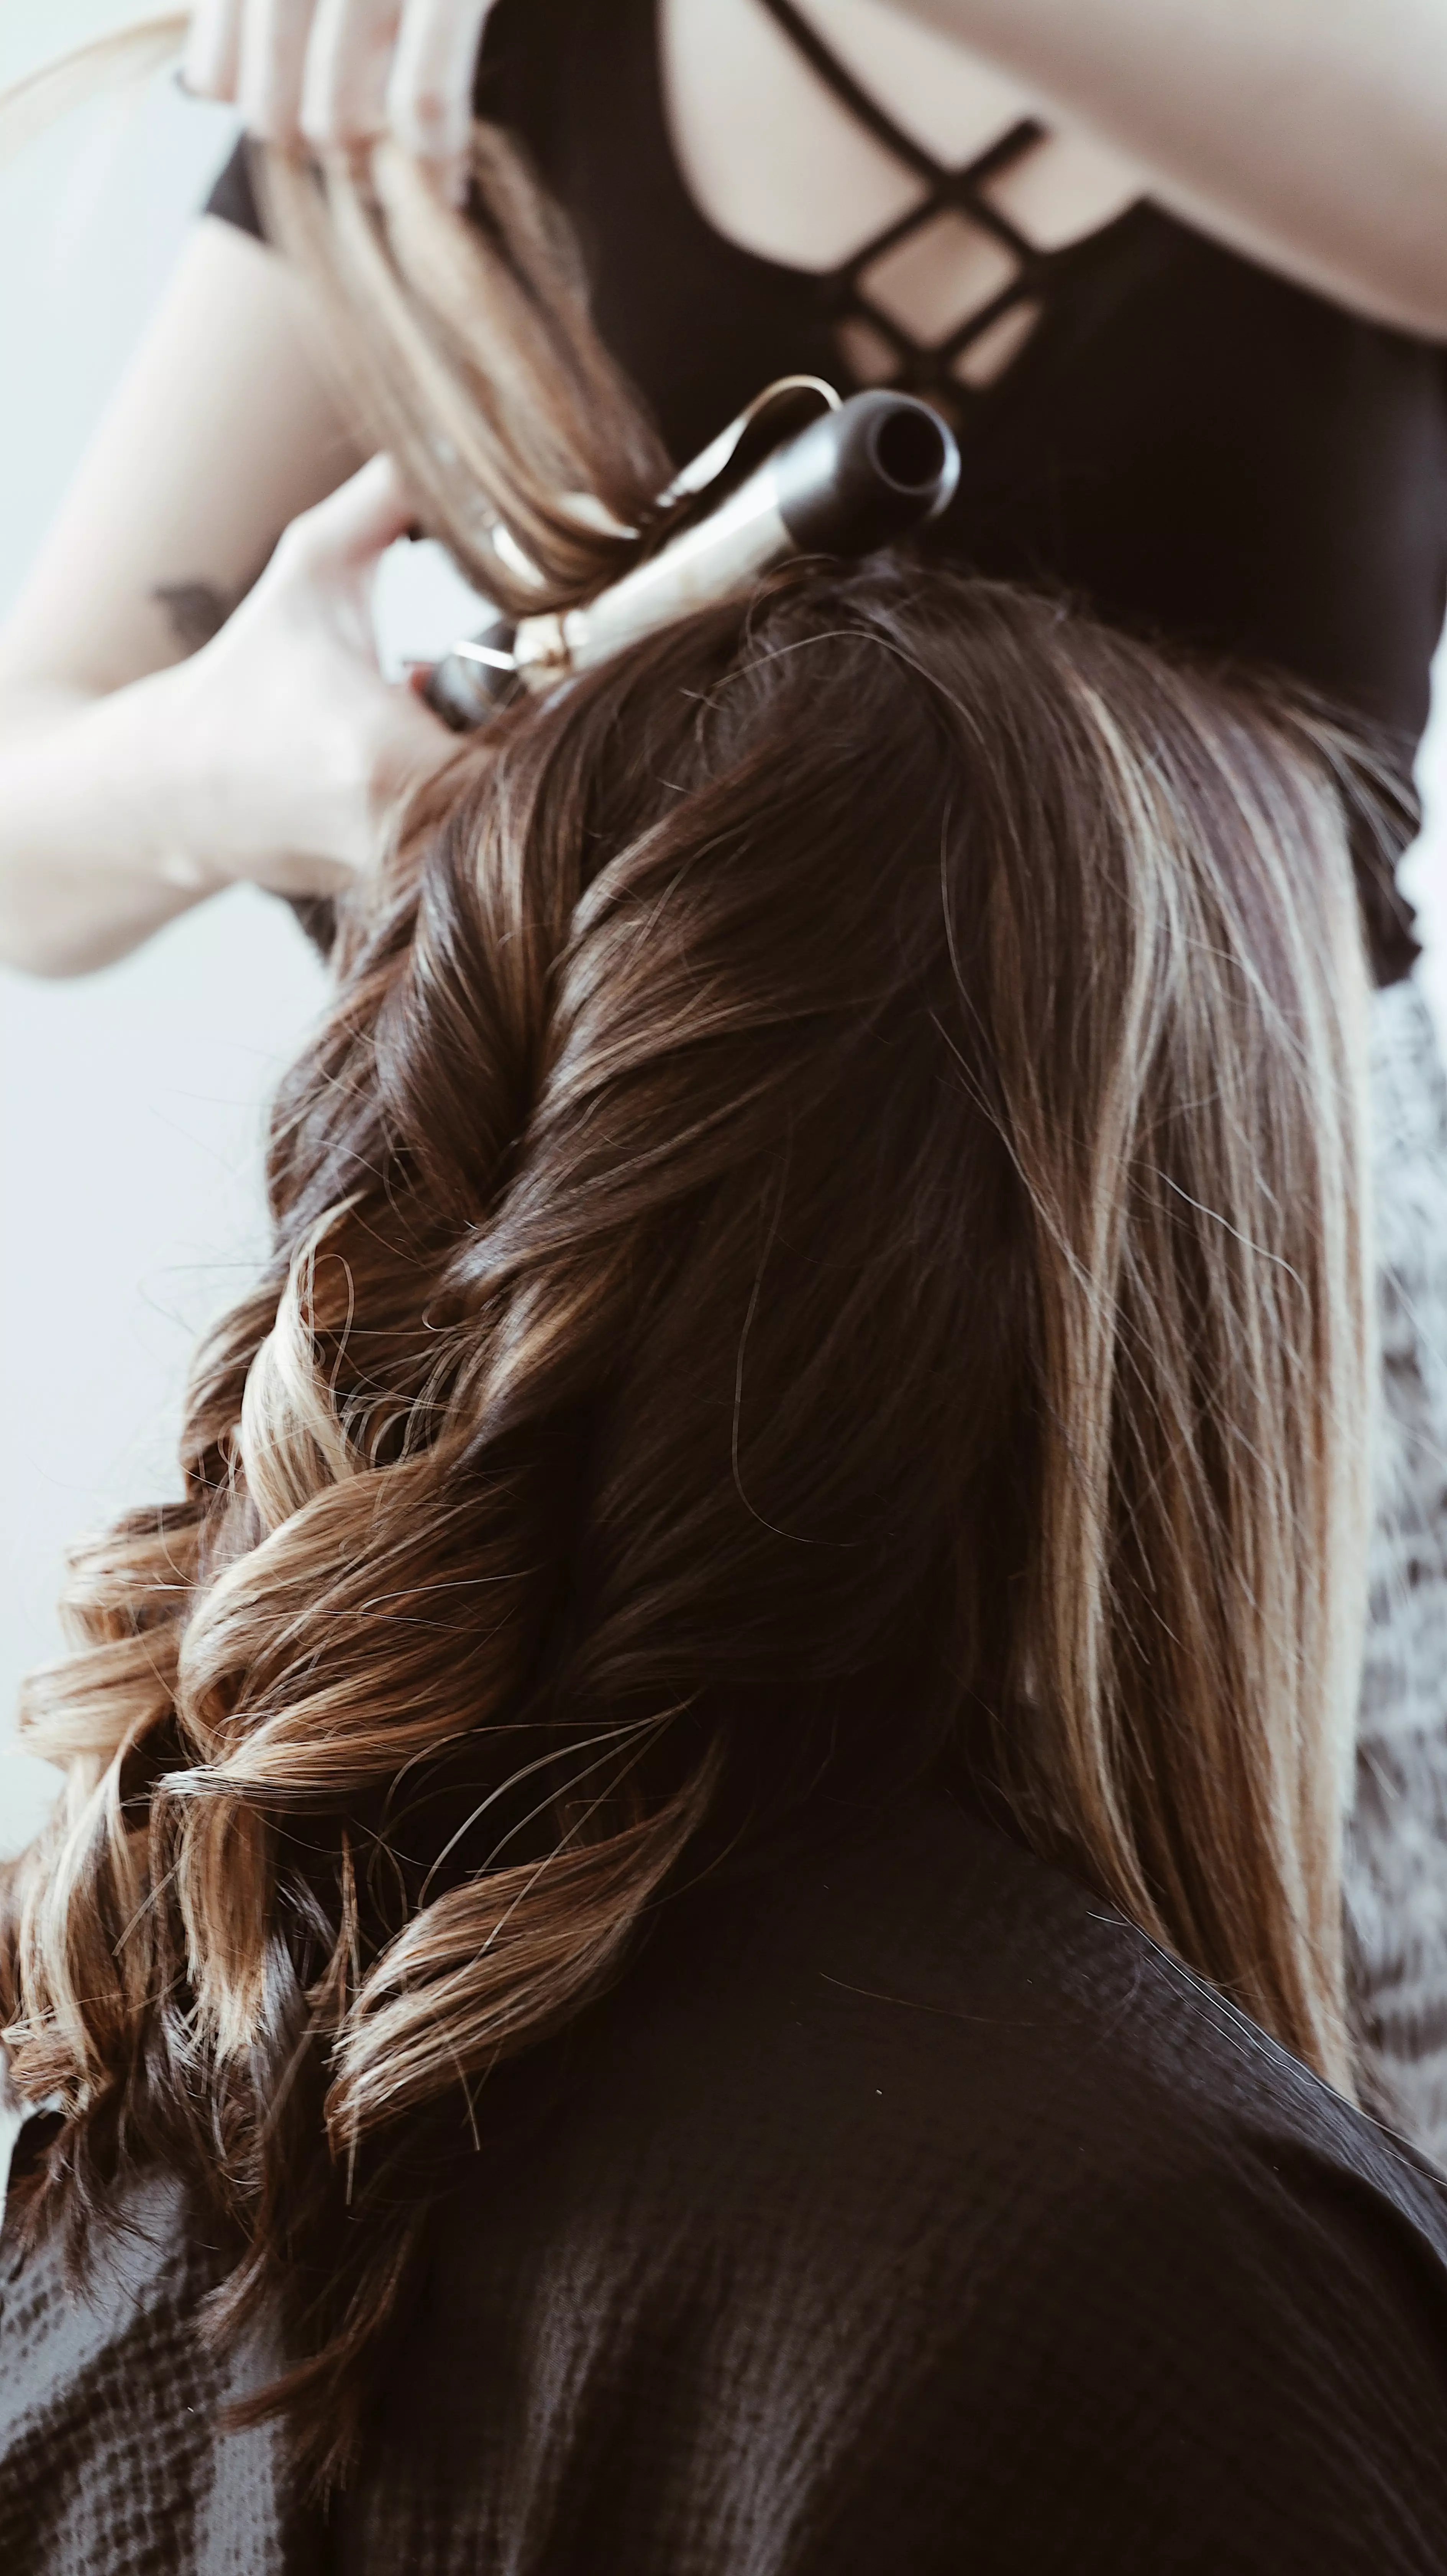 Could we see a shift away from the long, wavy styles that have dominated hairdressing in recent years? (